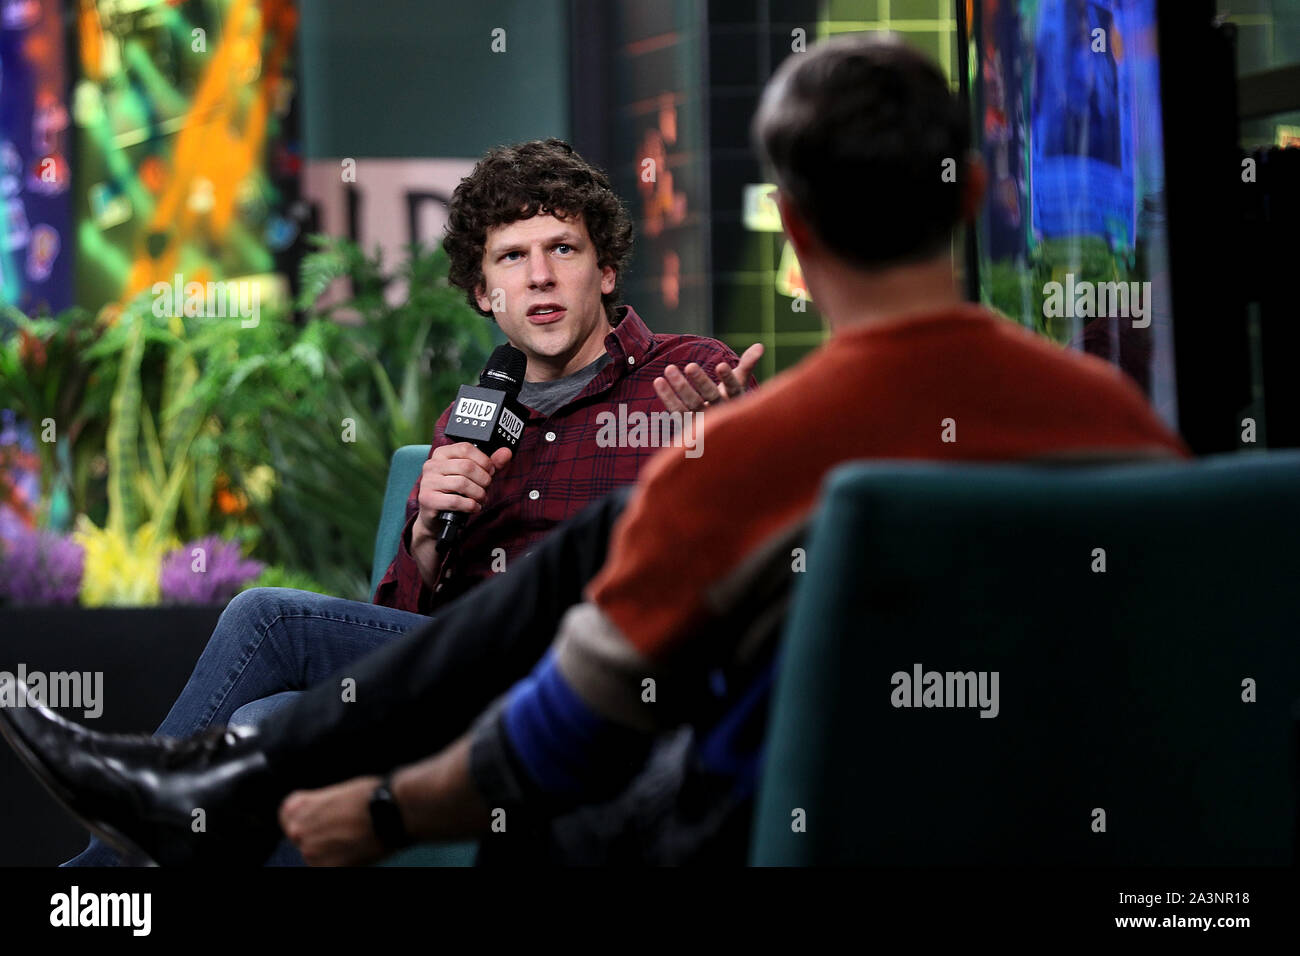 New York, NY, USA. 9 October, 2019. Jesse Eisenberg at the BUILD Speaker Series: Discussing the new comedy film "Zombieland: Double Tap" at BUILD Studio. Credit: Steve Mack/Alamy Live News Stock Photo